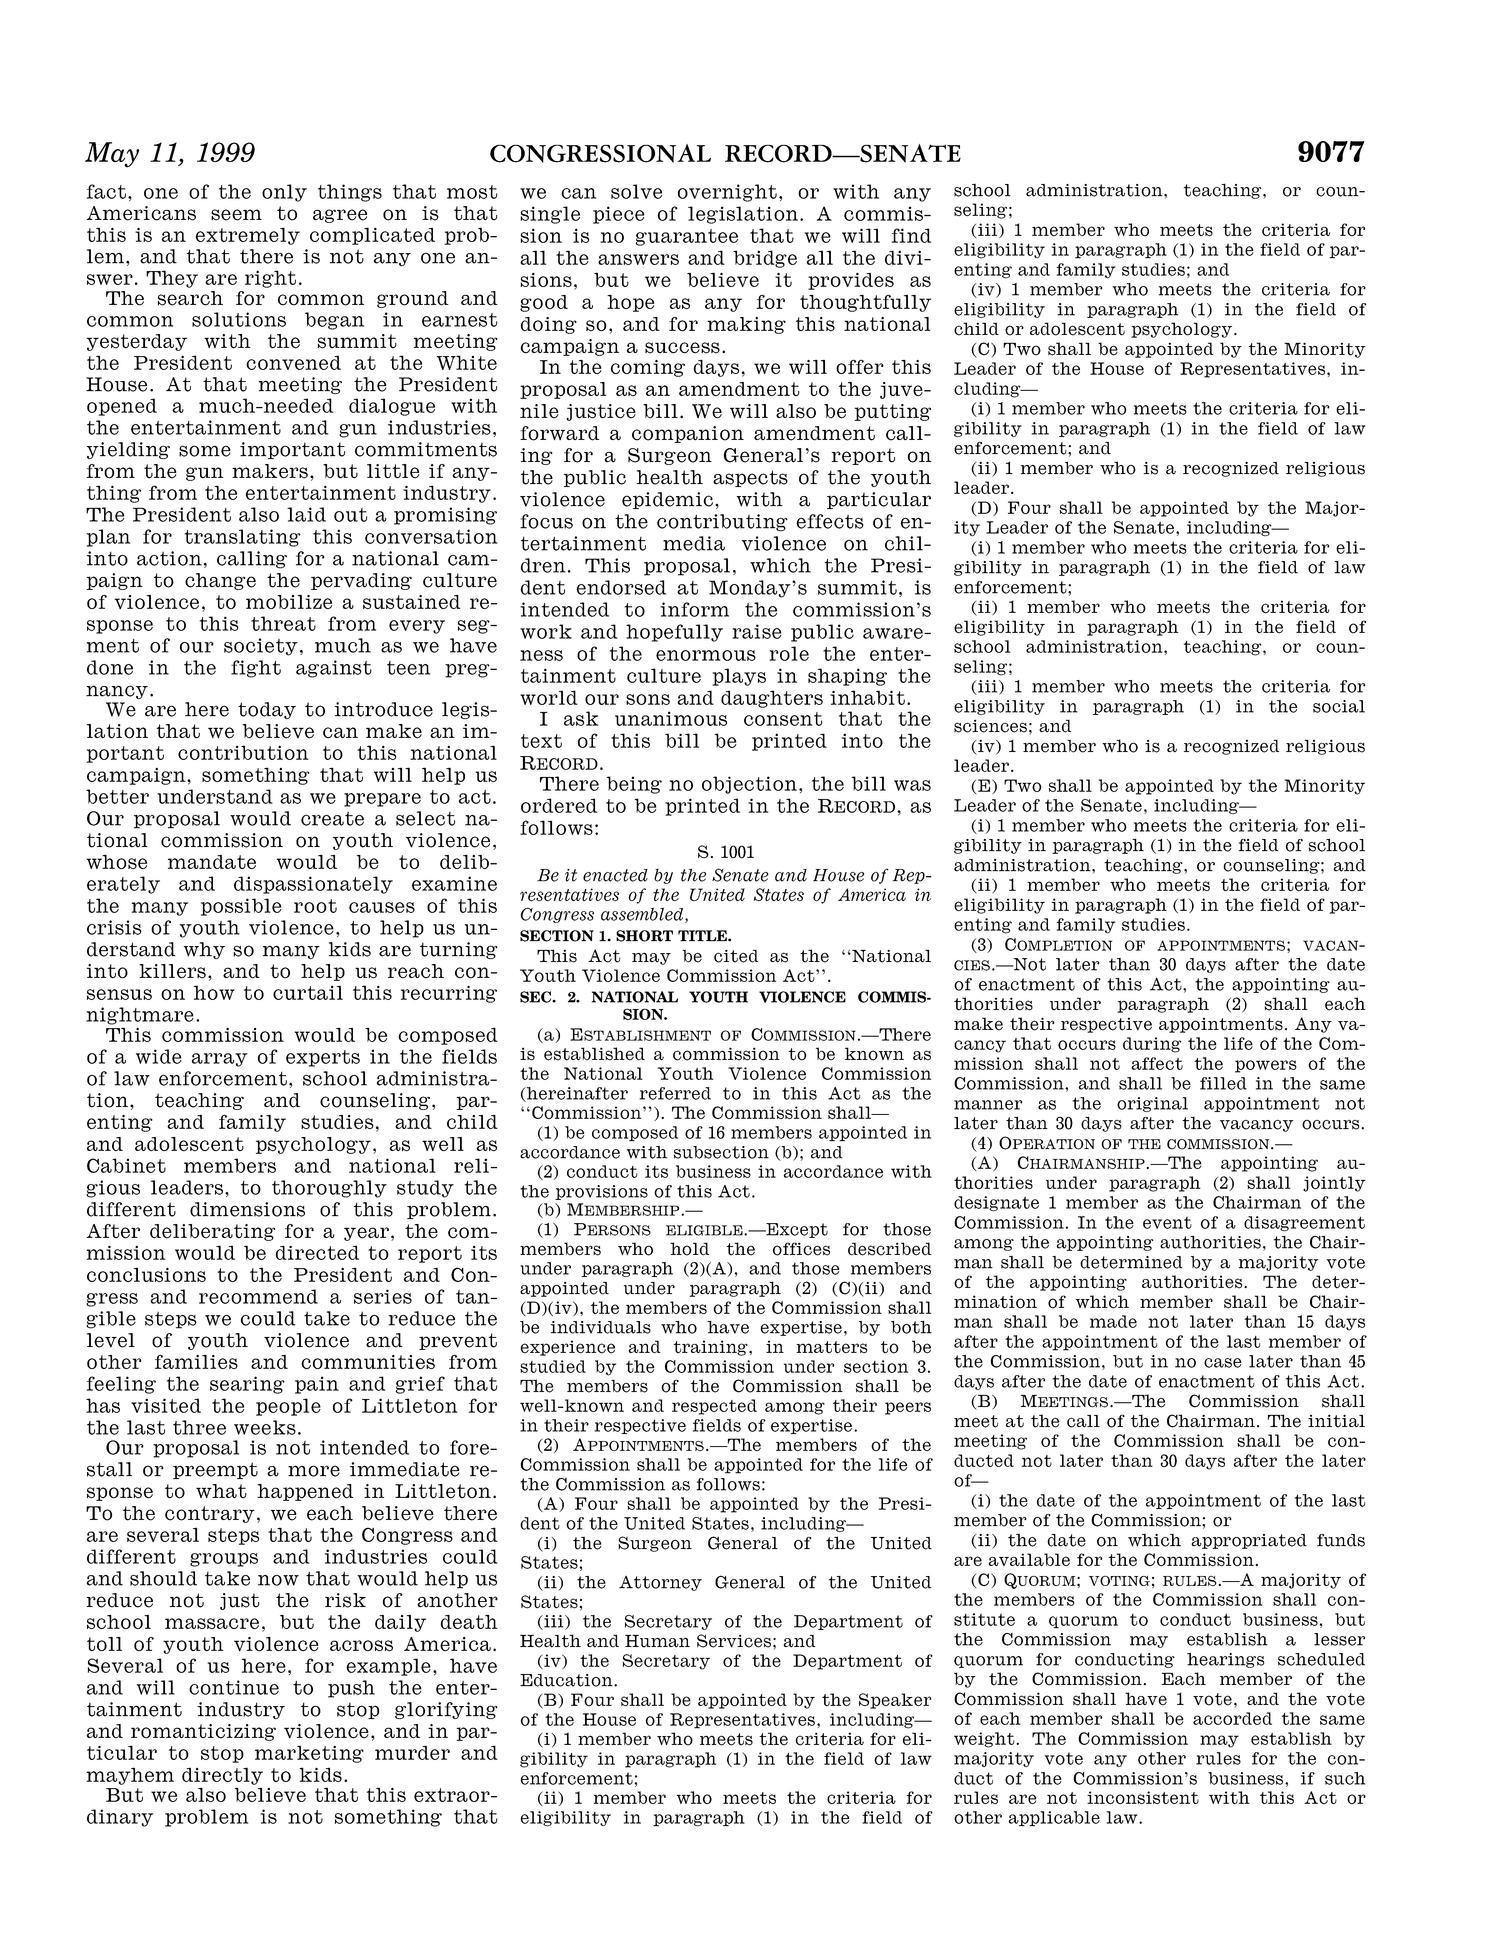 Congressional Record: Proceedings and Debates of the 106th Congress, First Session, Volume 145, Part 7
                                                
                                                    9077
                                                